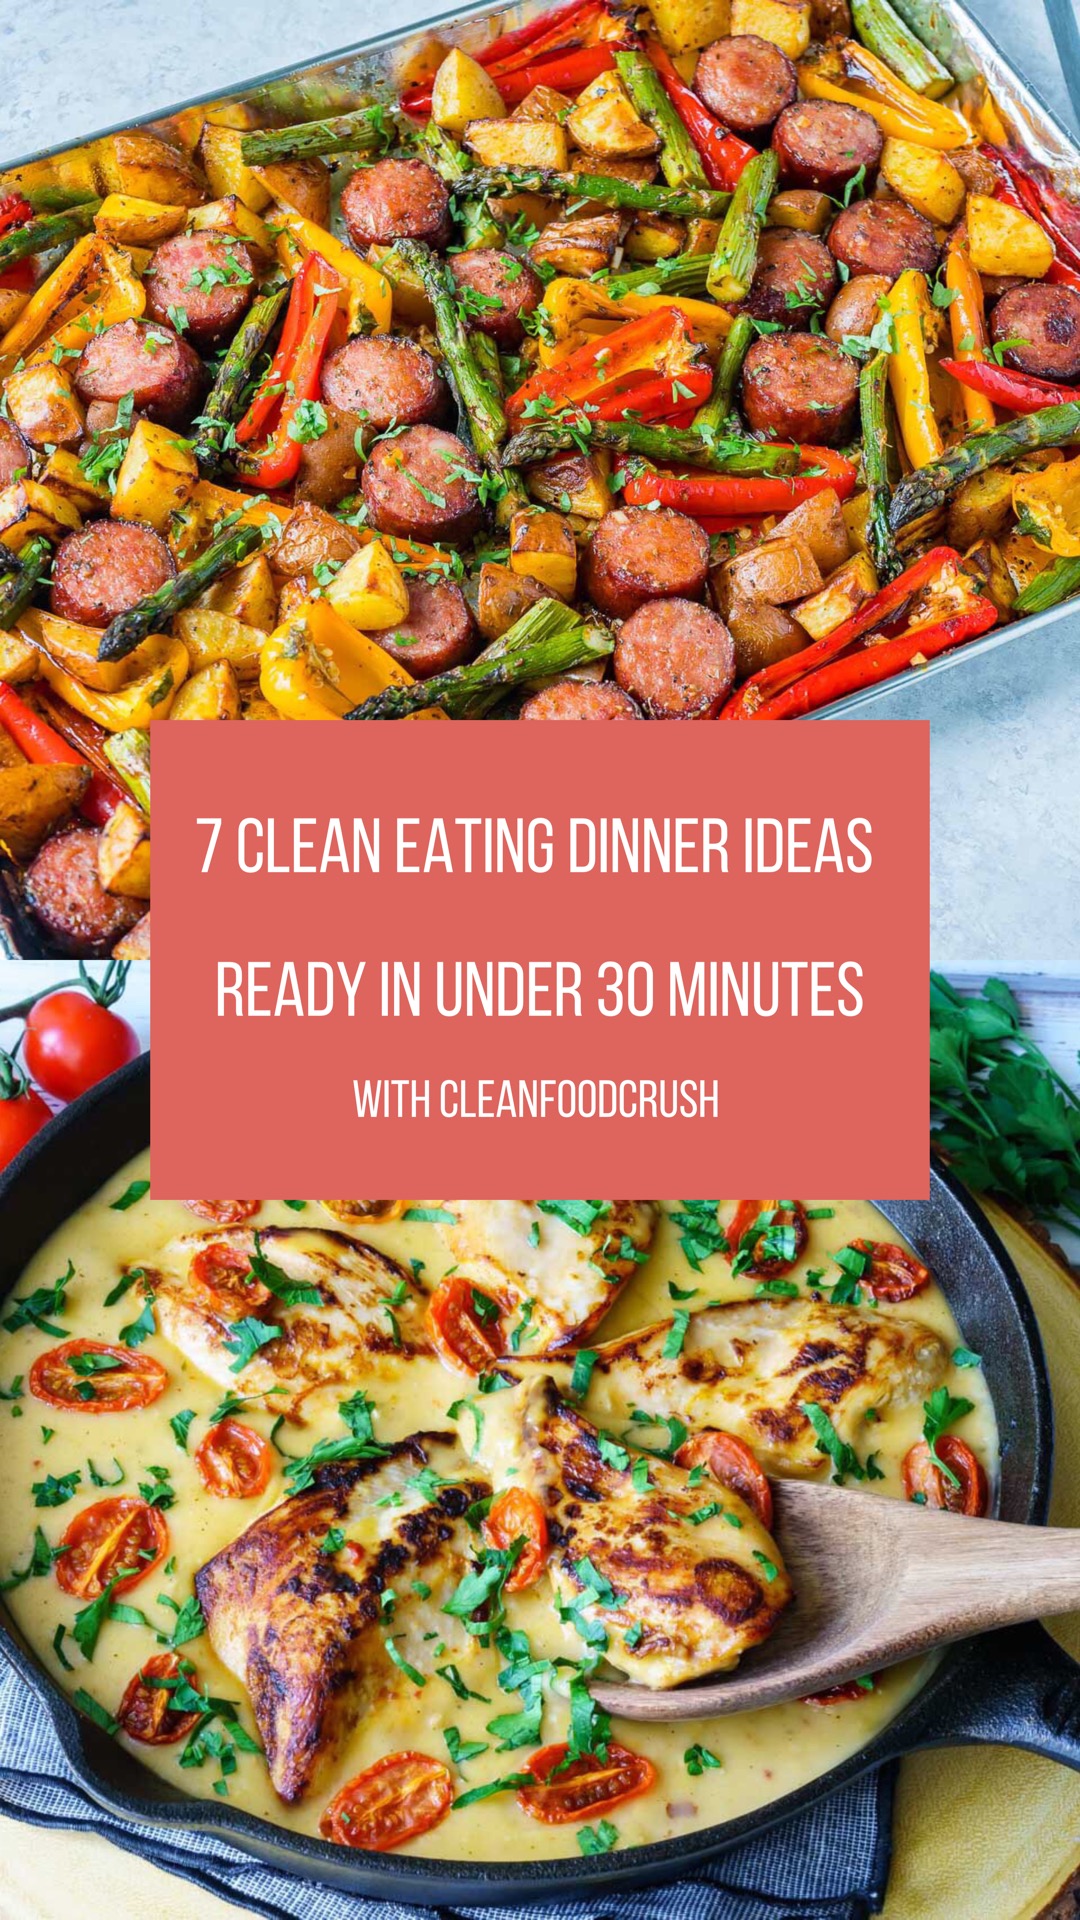 7 Clean Eating Dinner Ideas Ready in Under 30 Minutes! | Clean Food Crush